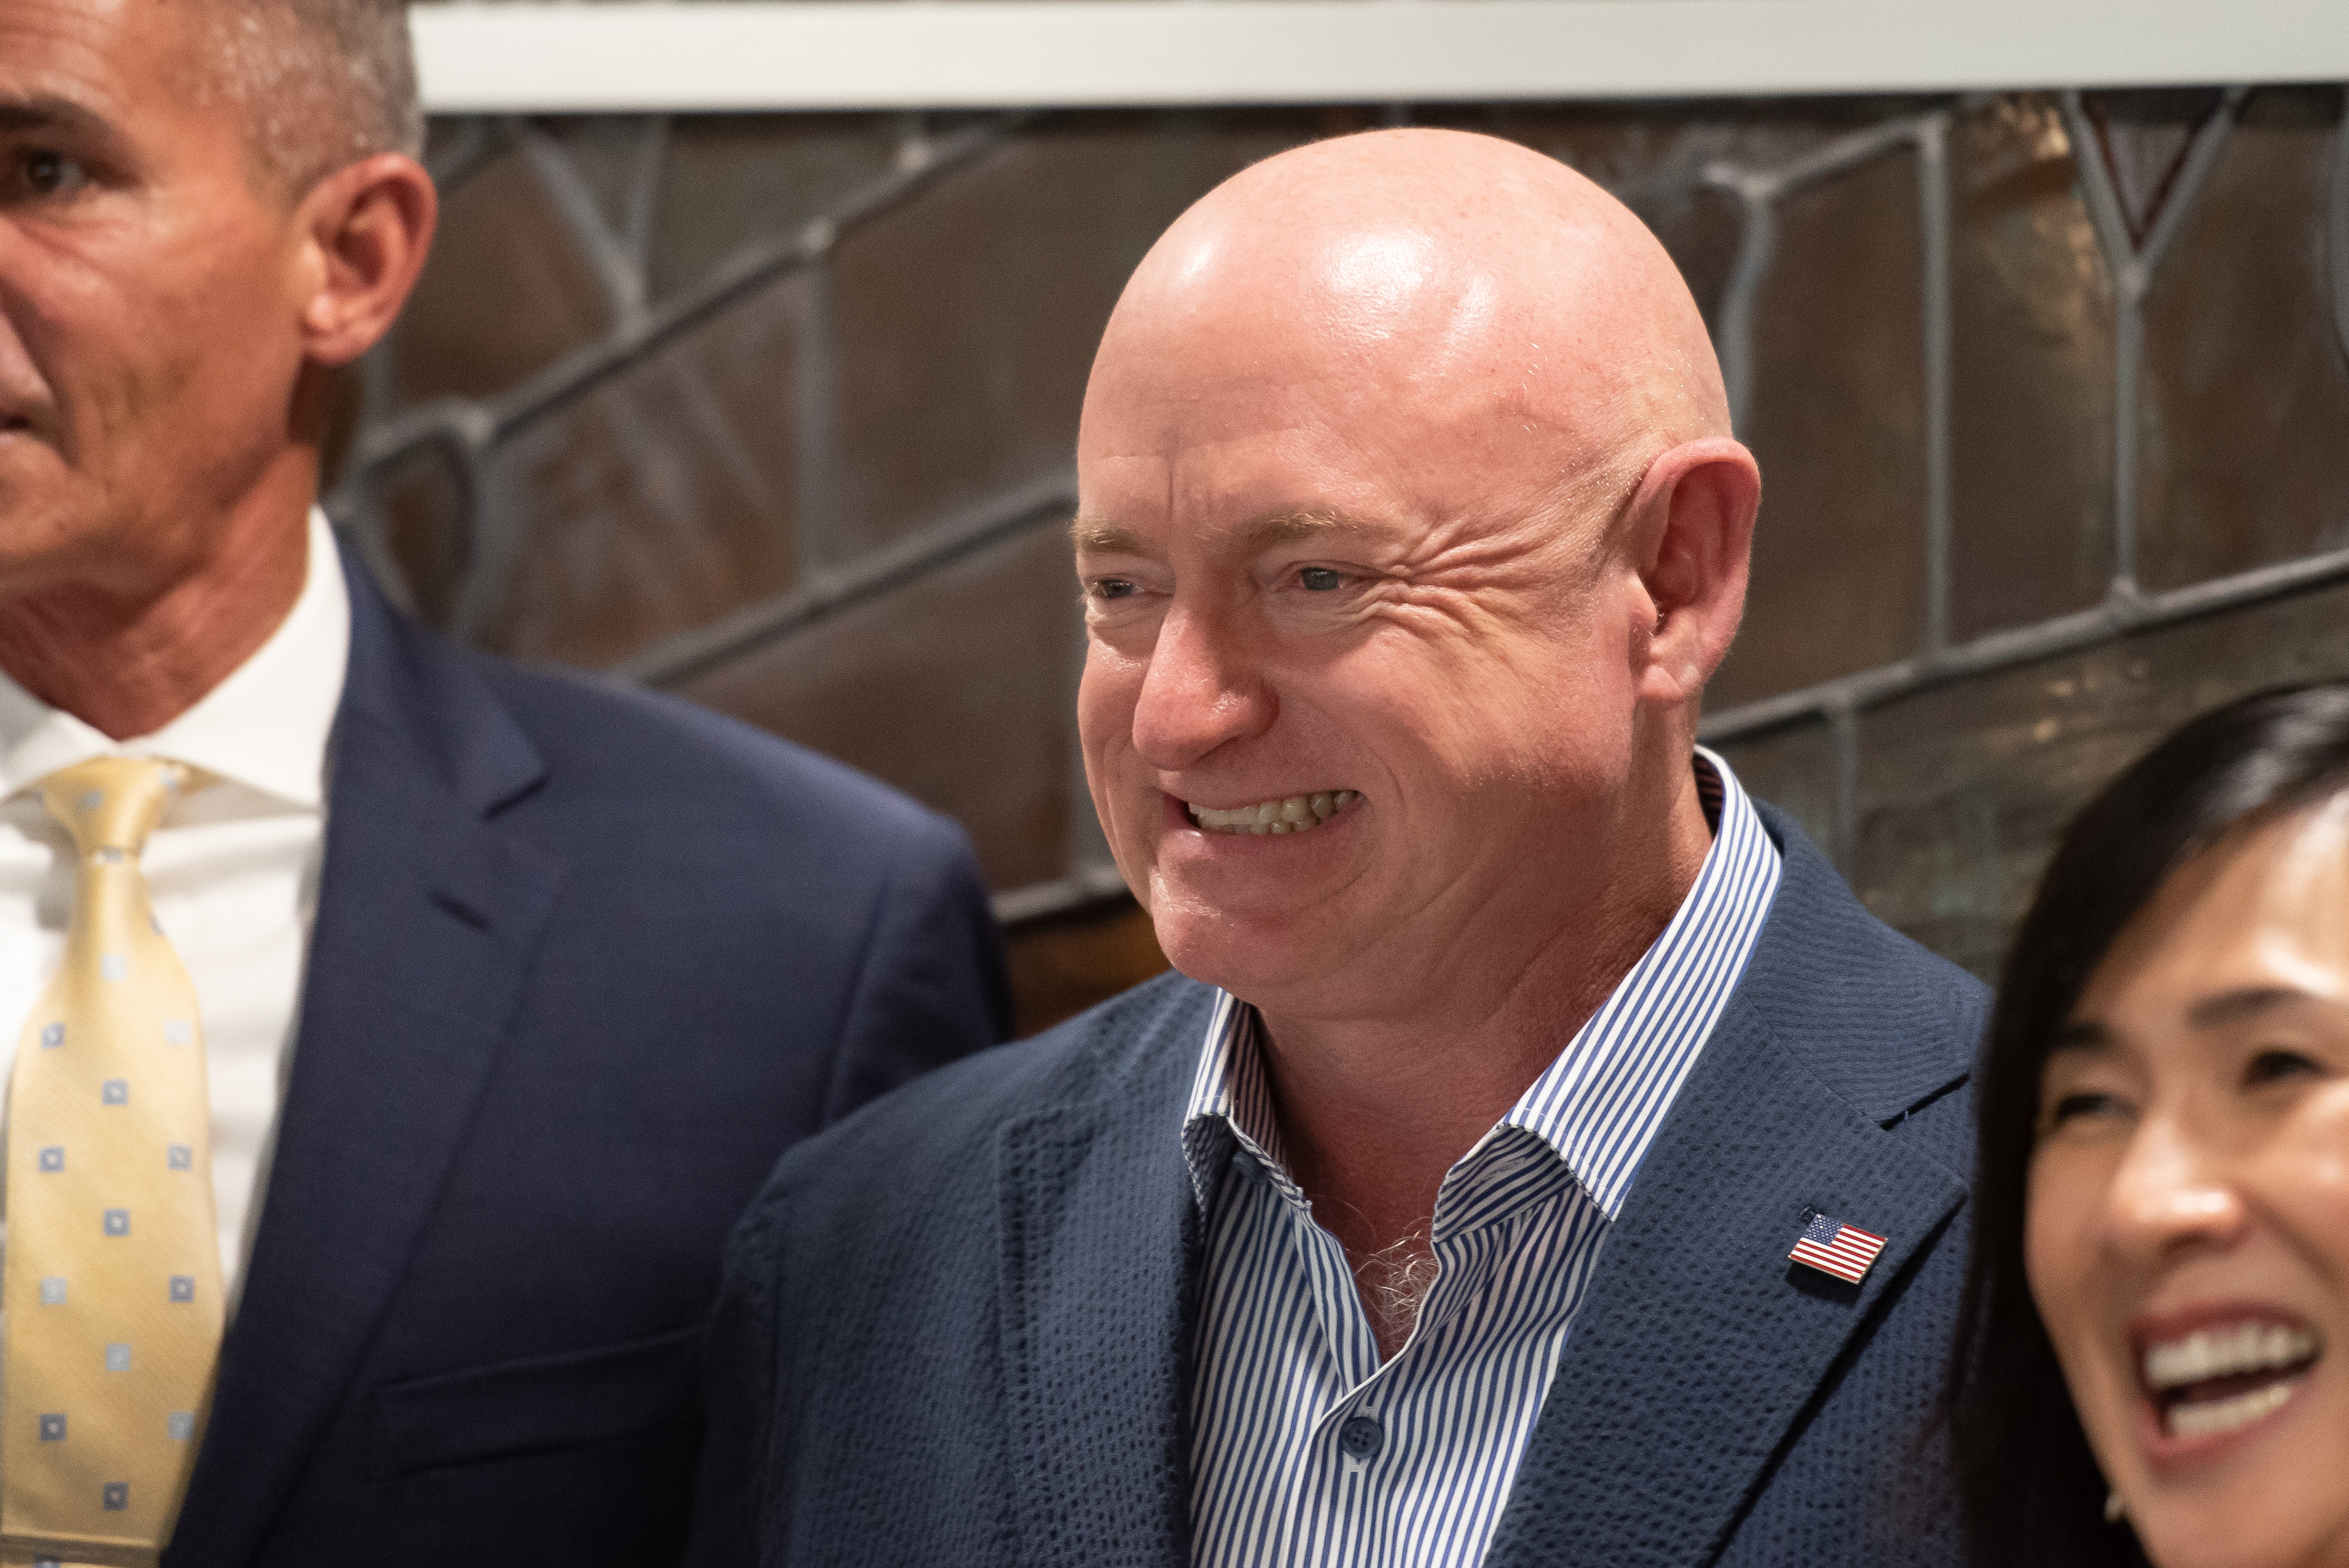 Sen. Mark Kelly (D-AZ) take a group photo at Handmaker Jewish Services for Aging on October 13, 2022 in Tucson, Arizona. Sen. Mark Kelly is campaigning for re-election against far-right, Trump-endorsed Republican candidate Blake Masters.